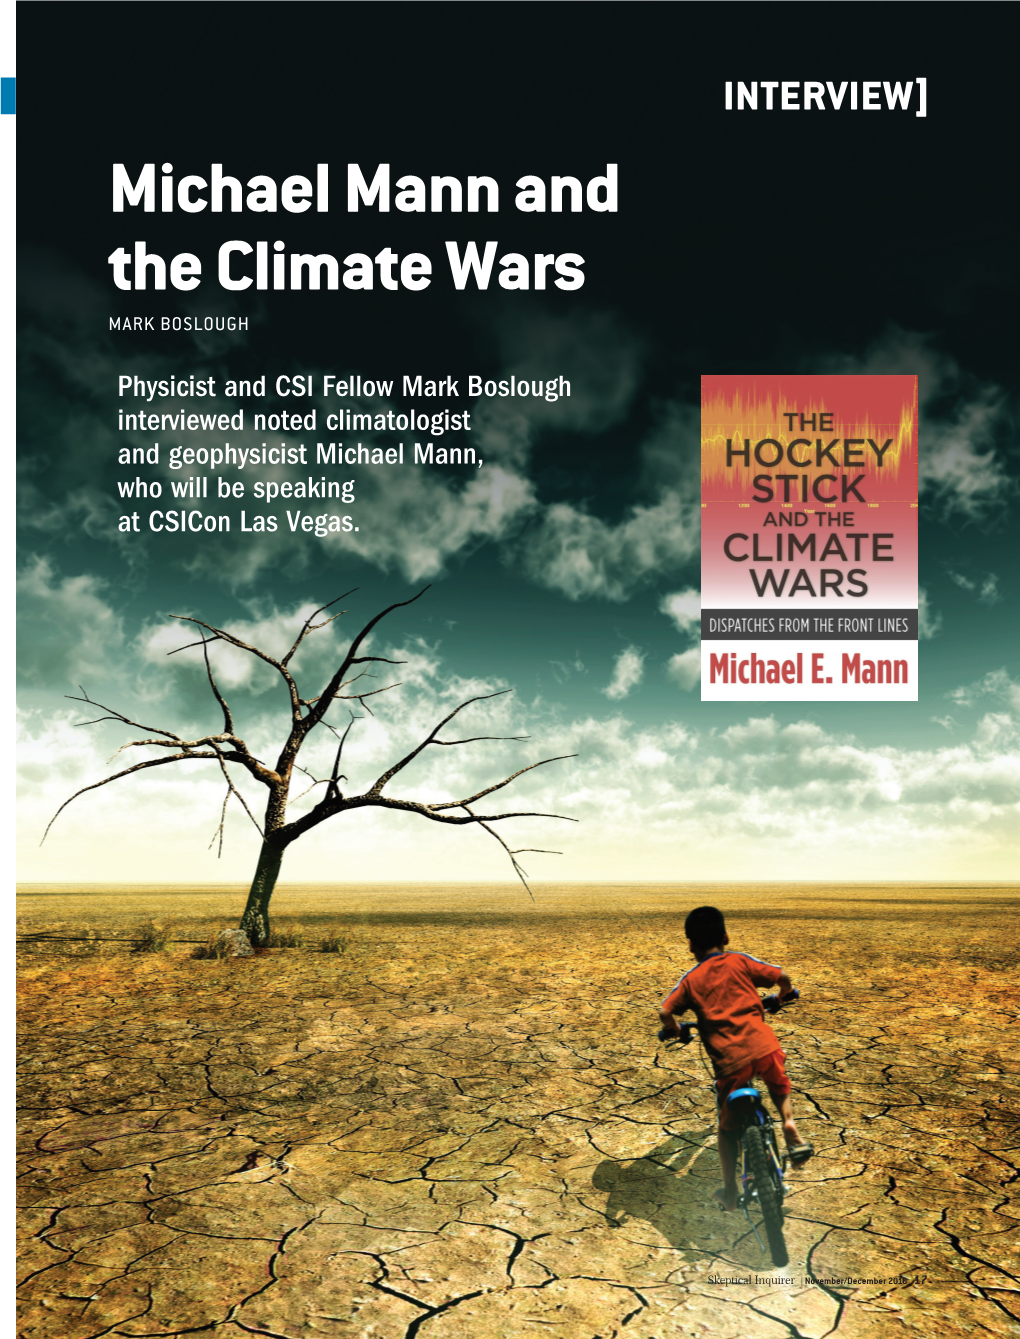 Michael Mann and the Climate Wars MARK BOSLOUGH